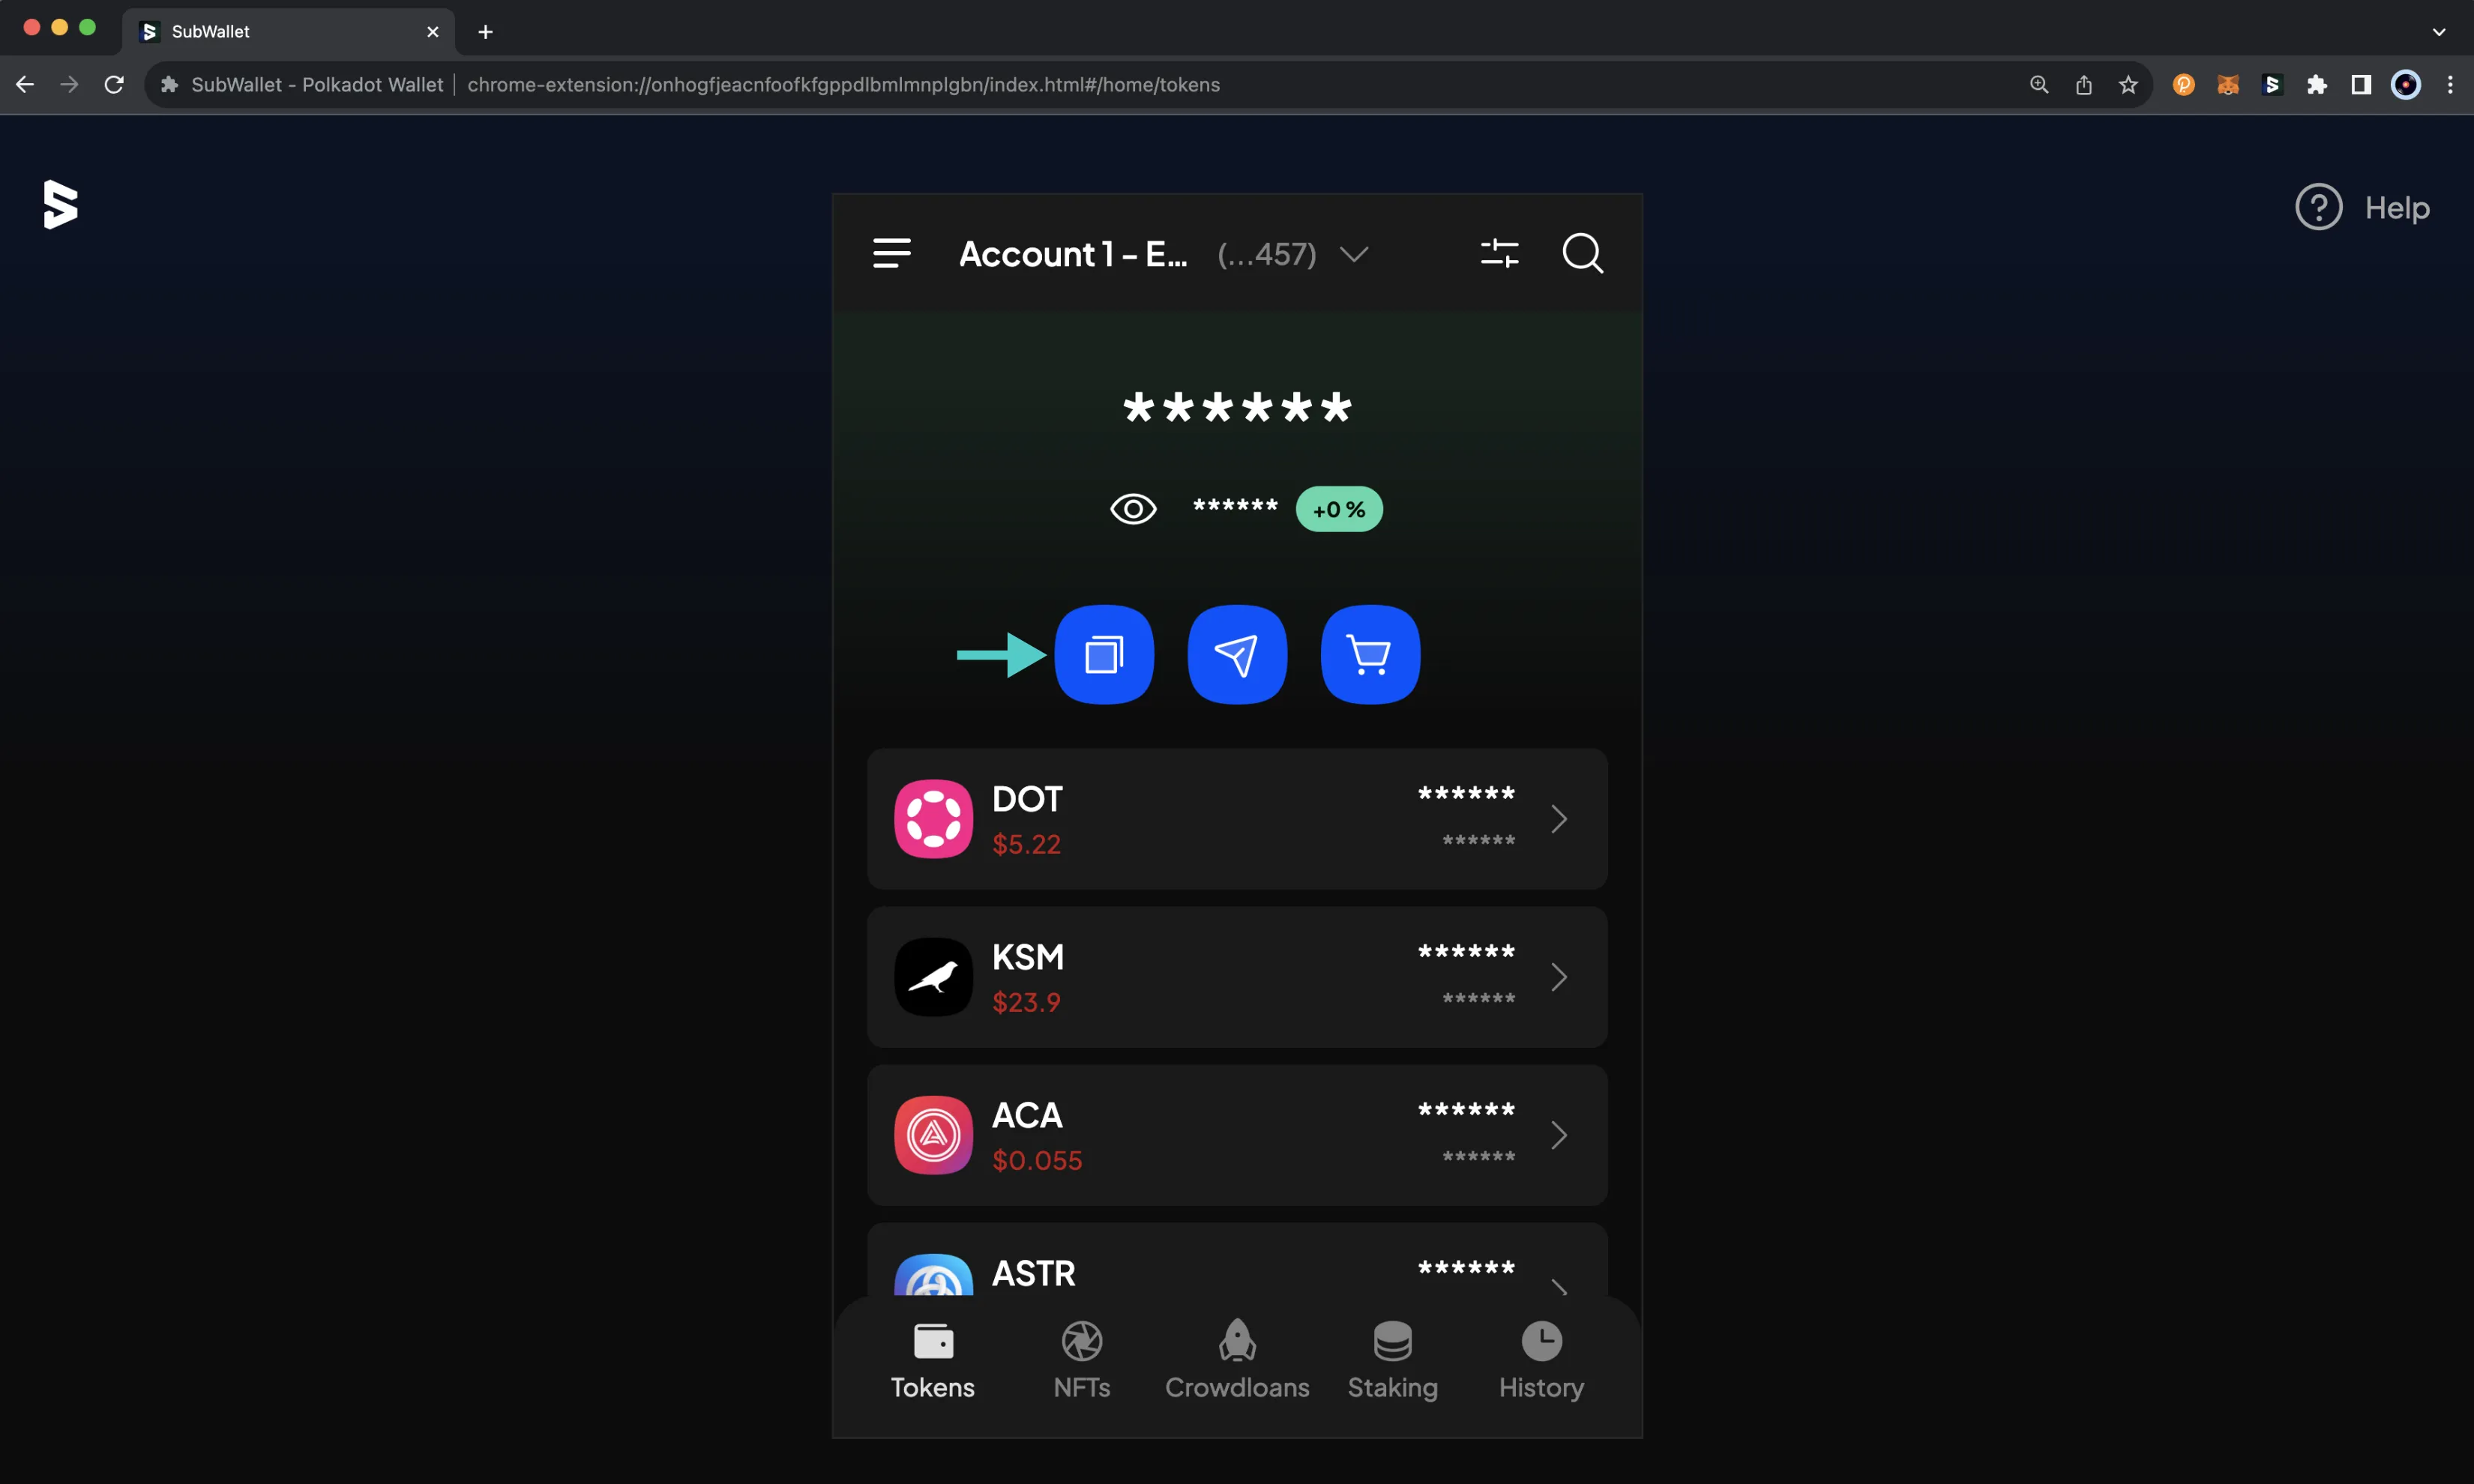 The tokens screen on the SubWallet browser extension.